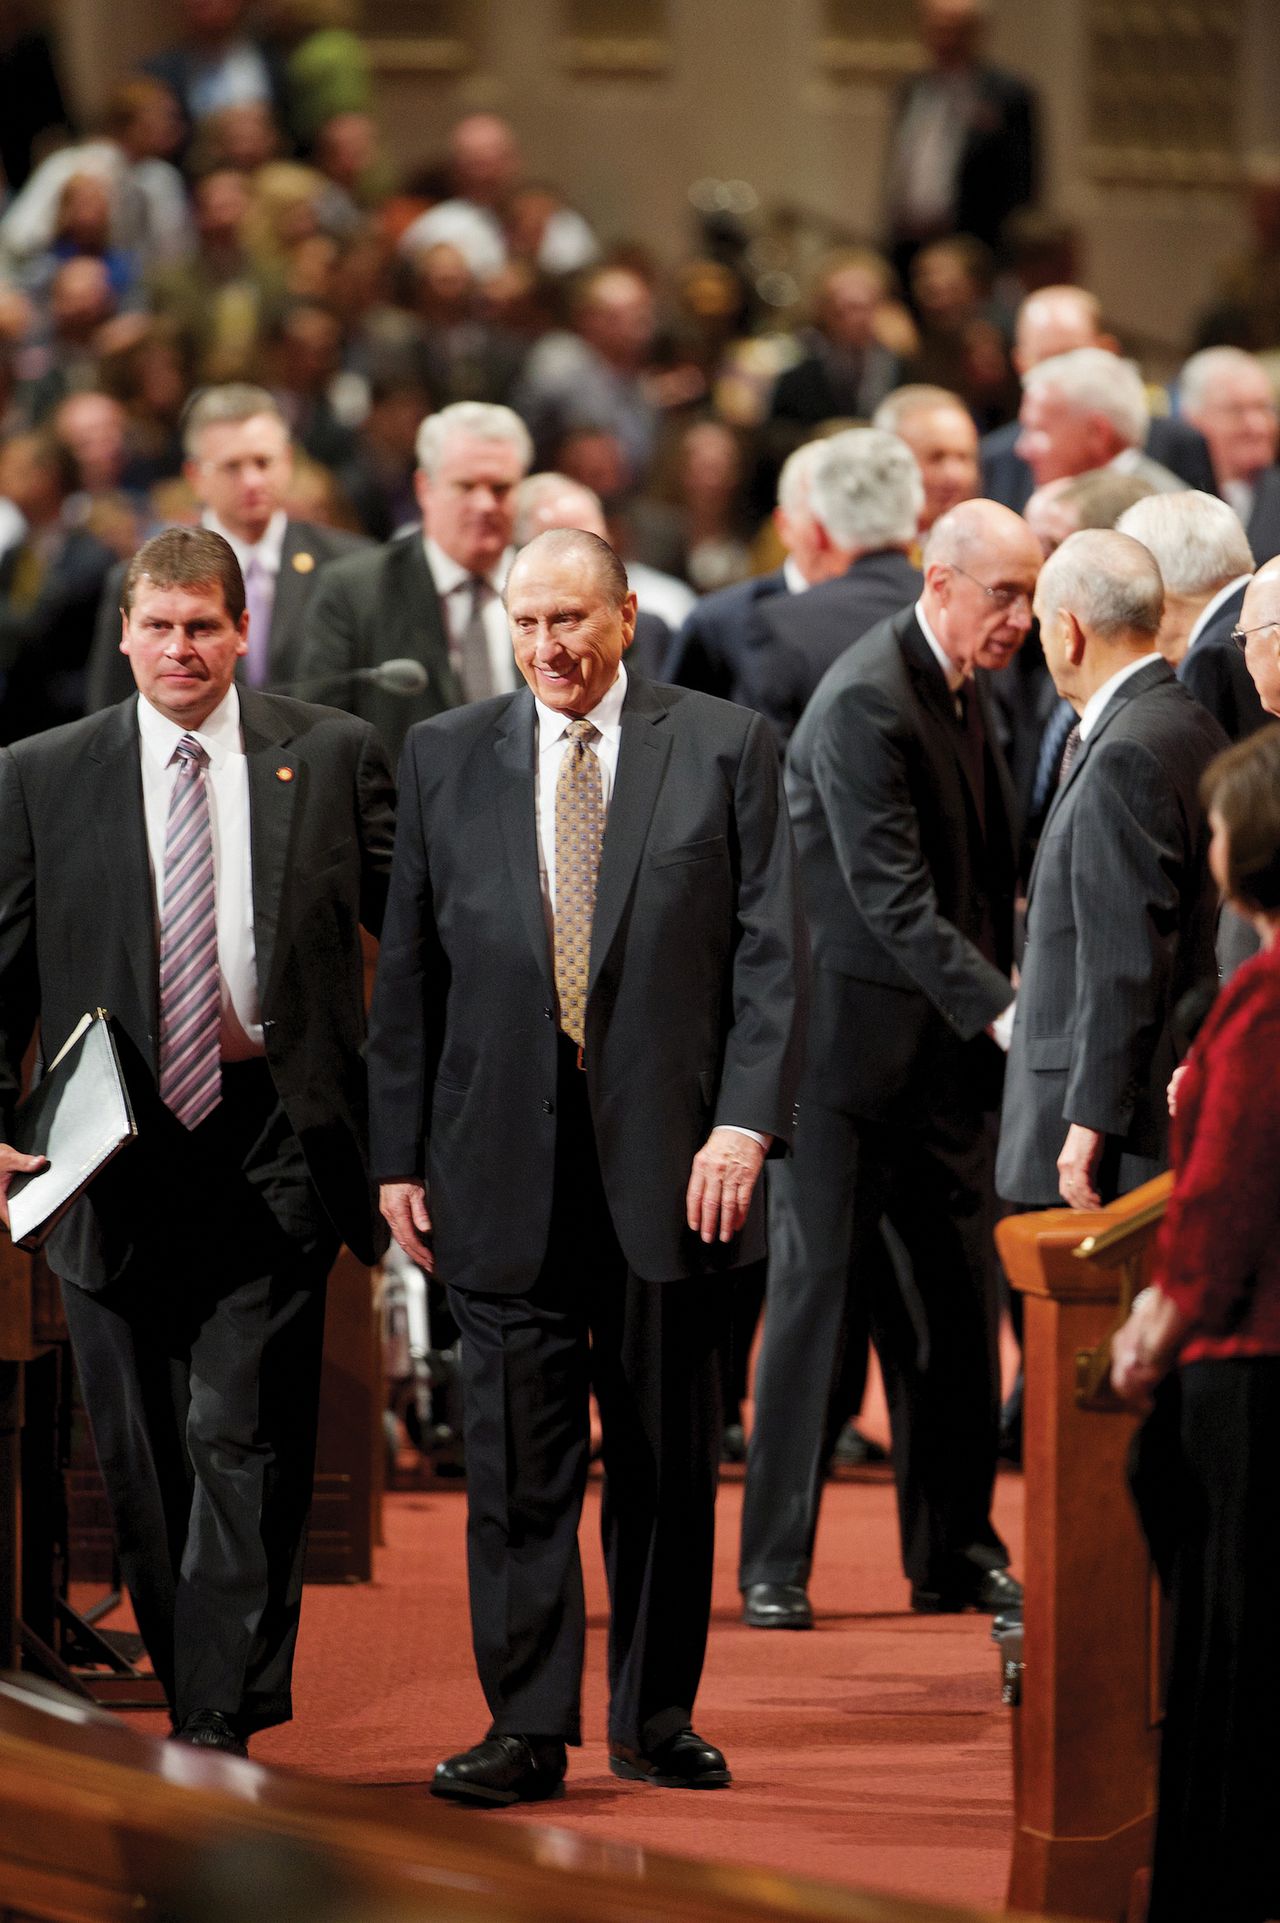 Thomas S. Monson exiting the Conference Center with his security guard.